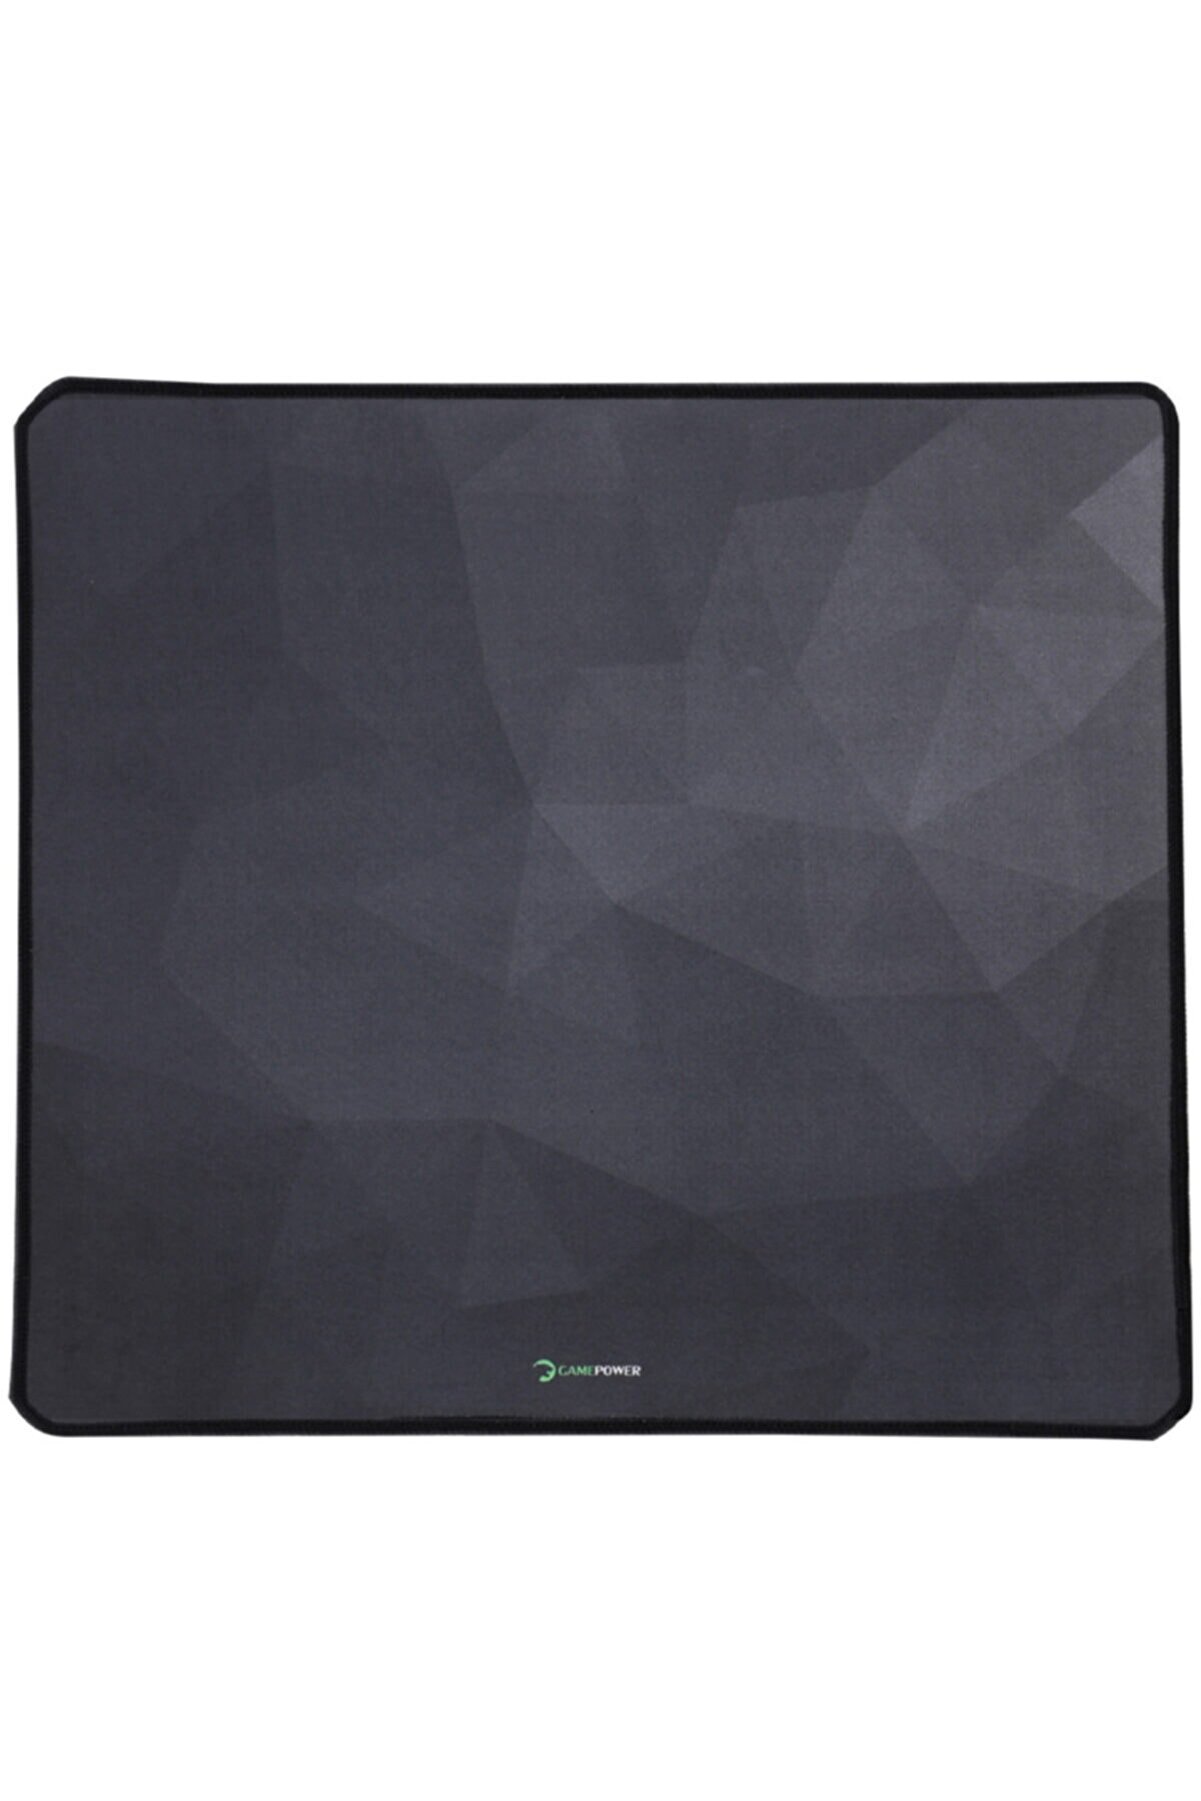 Gamepower Gaming Mouse Pad Gpr400 400x400x3mm